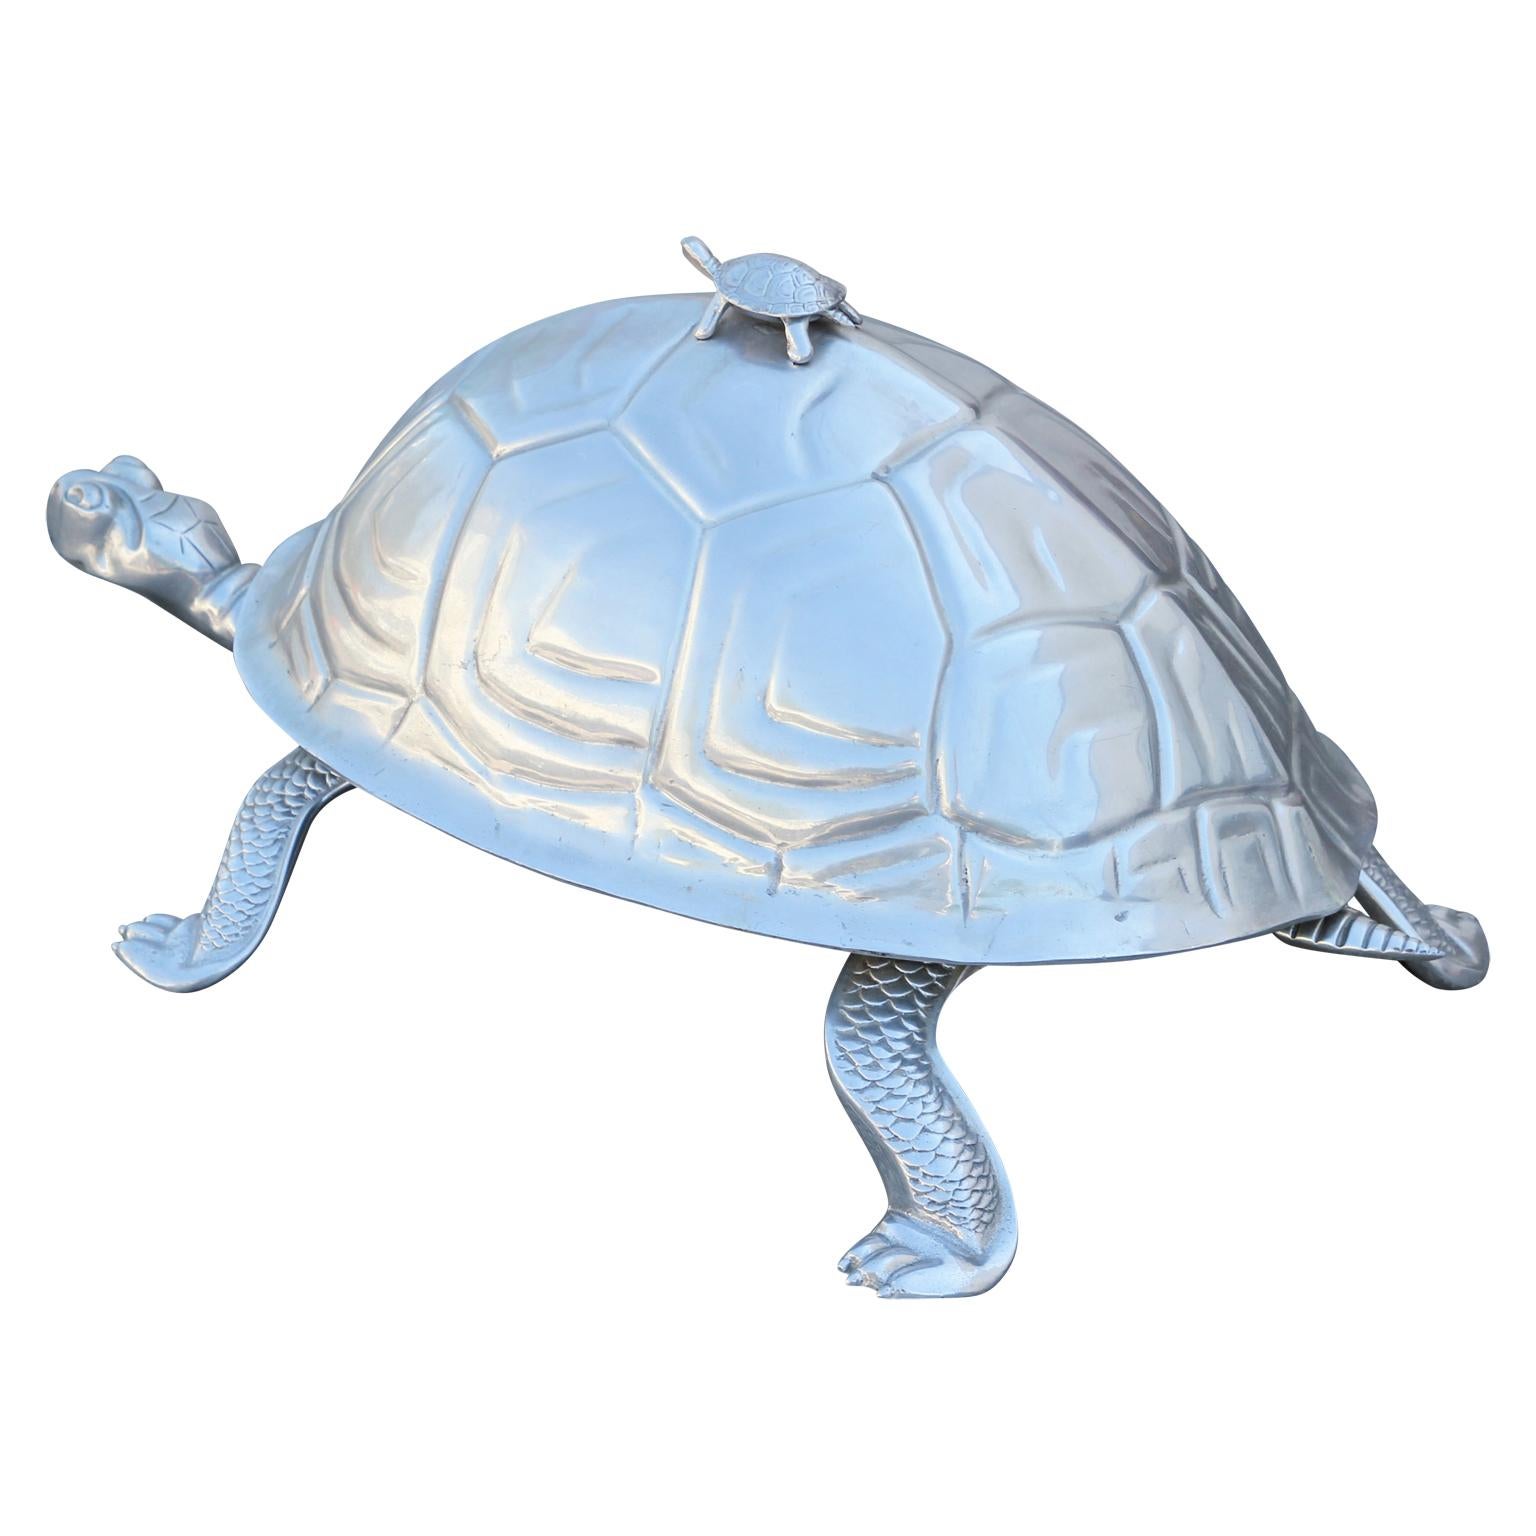 Monumental aluminum turtle / tortoise serving platter by the designer Arthur Court. There is a carved wooden tray inside that is removable. Stunning centerpiece for any room.